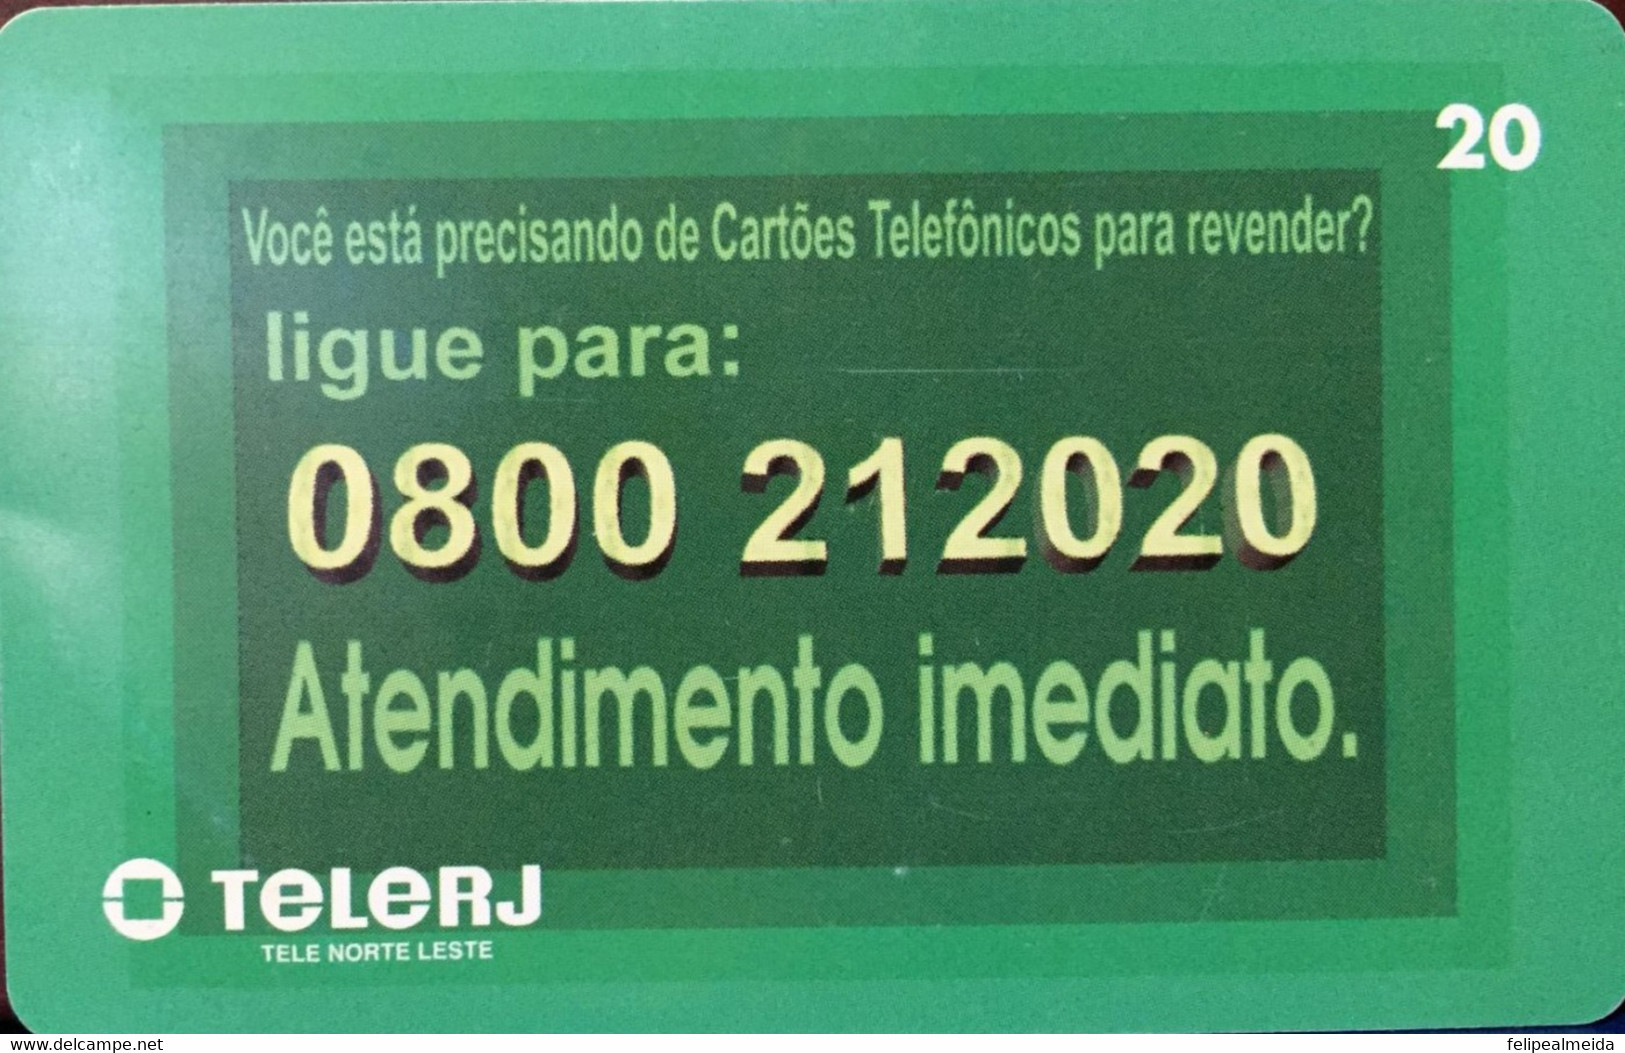 Phone Card Manufactured By Telerj In 1999 - Incentive To Phone Card Resellers At The Time - Telekom-Betreiber